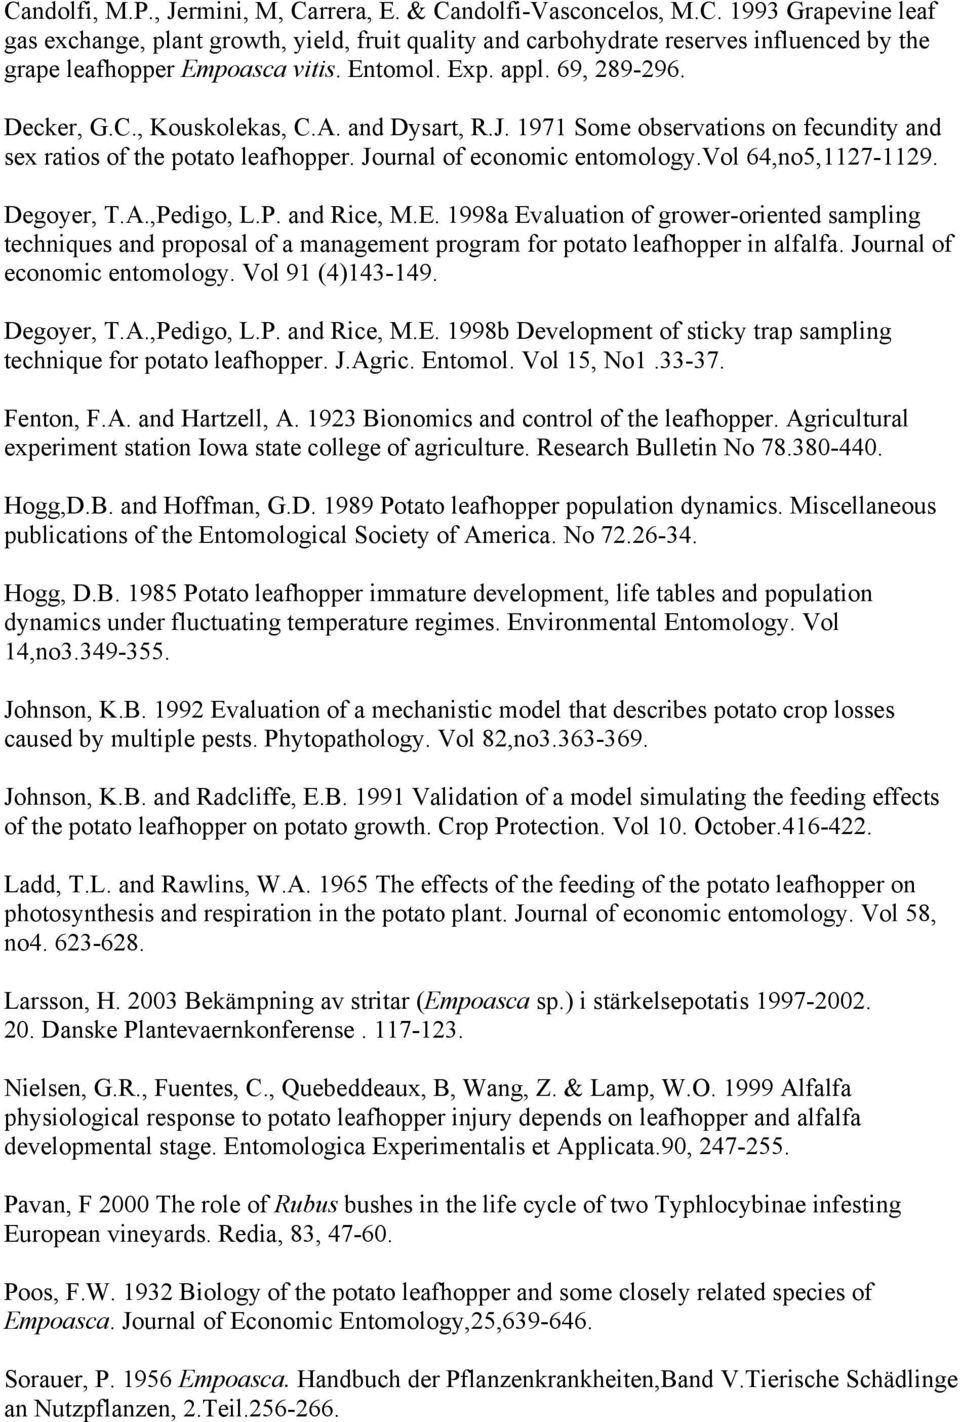 vol 64,no5,1127-1129. Degoyer, T.A.,Pedigo, L.P. and Rice, M.E. 1998a Evaluation of grower-oriented sampling techniques and proposal of a management program for potato leafhopper in alfalfa.